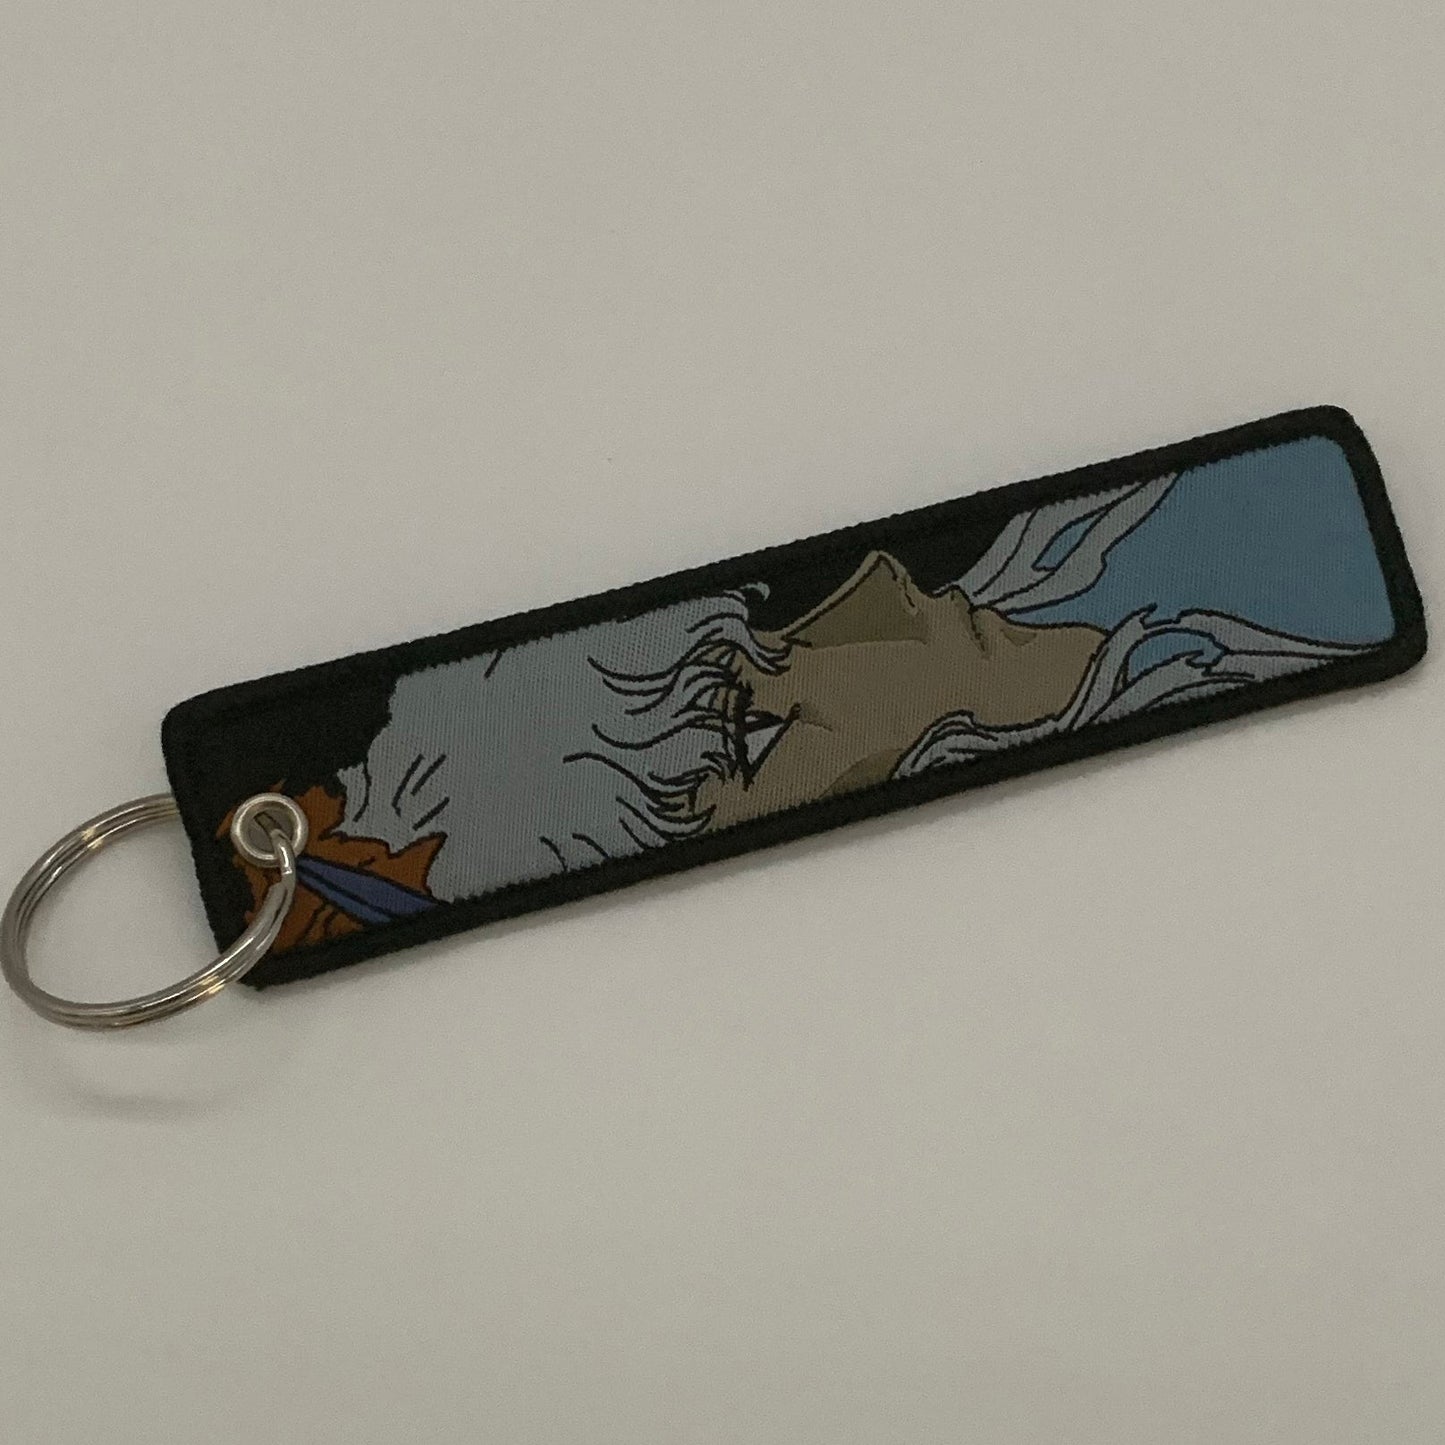 LIMITED Berserk Griffith EMBROIDERED KEY CHAIN